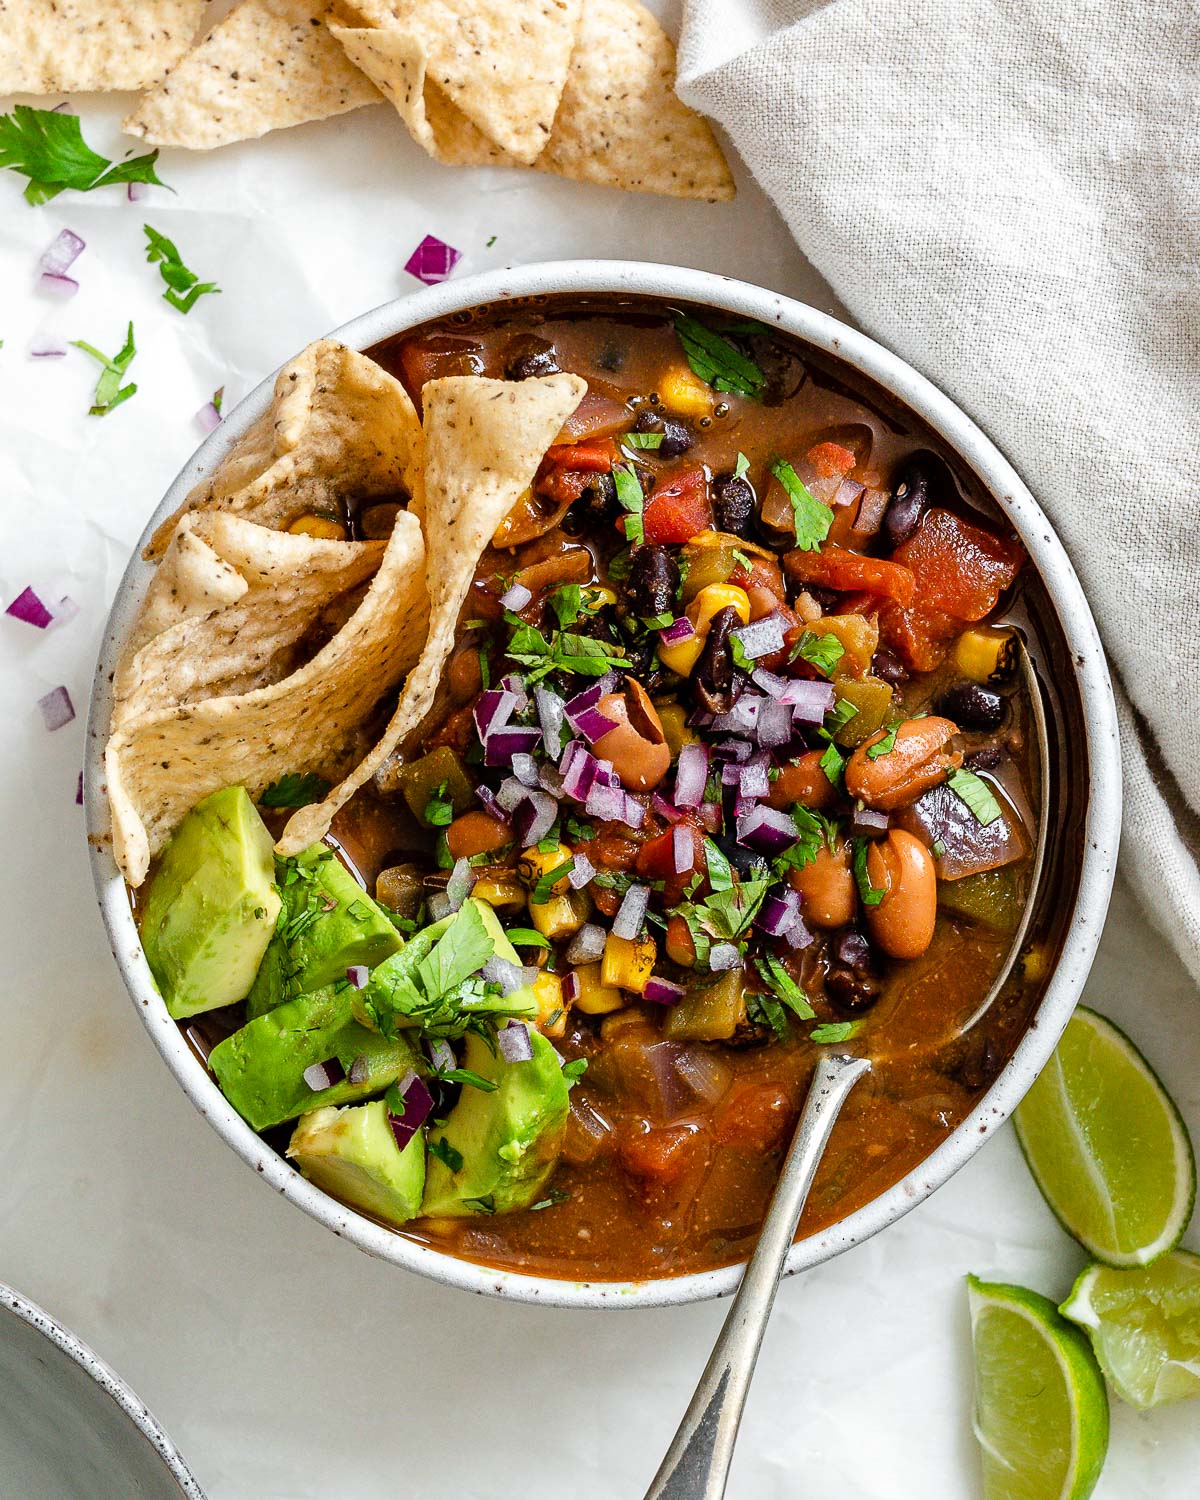 completed Easy Vegan Taco Soup in a bowl against a light surface